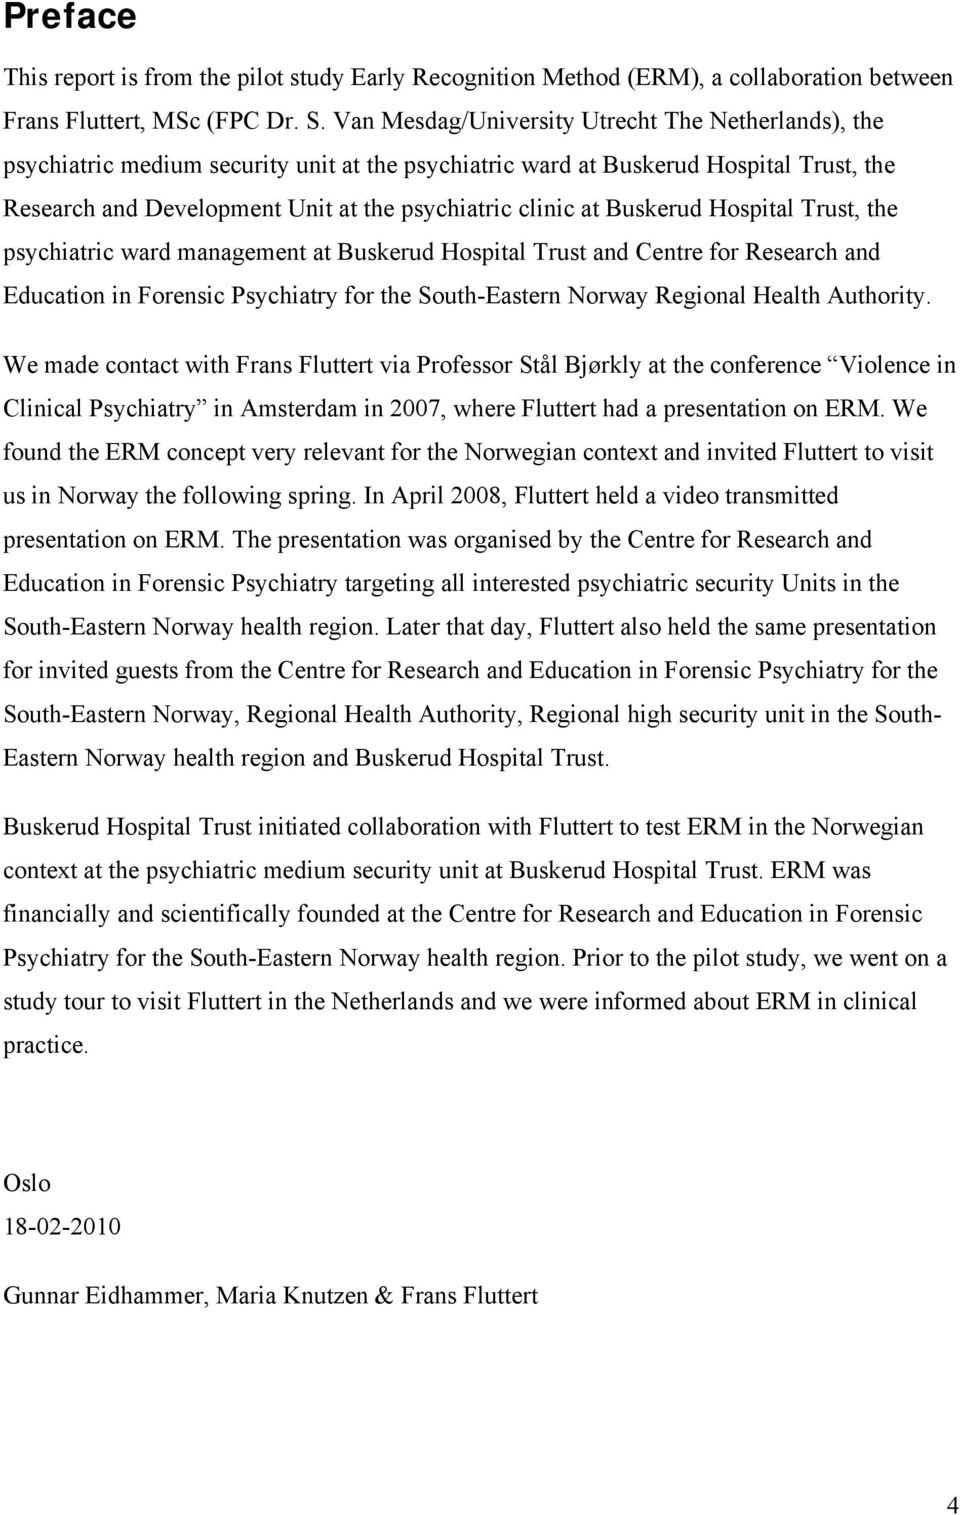 Buskerud Hospital Trust, the psychiatric ward management at Buskerud Hospital Trust and Centre for Research and Education in Forensic Psychiatry for the South-Eastern Norway Regional Health Authority.